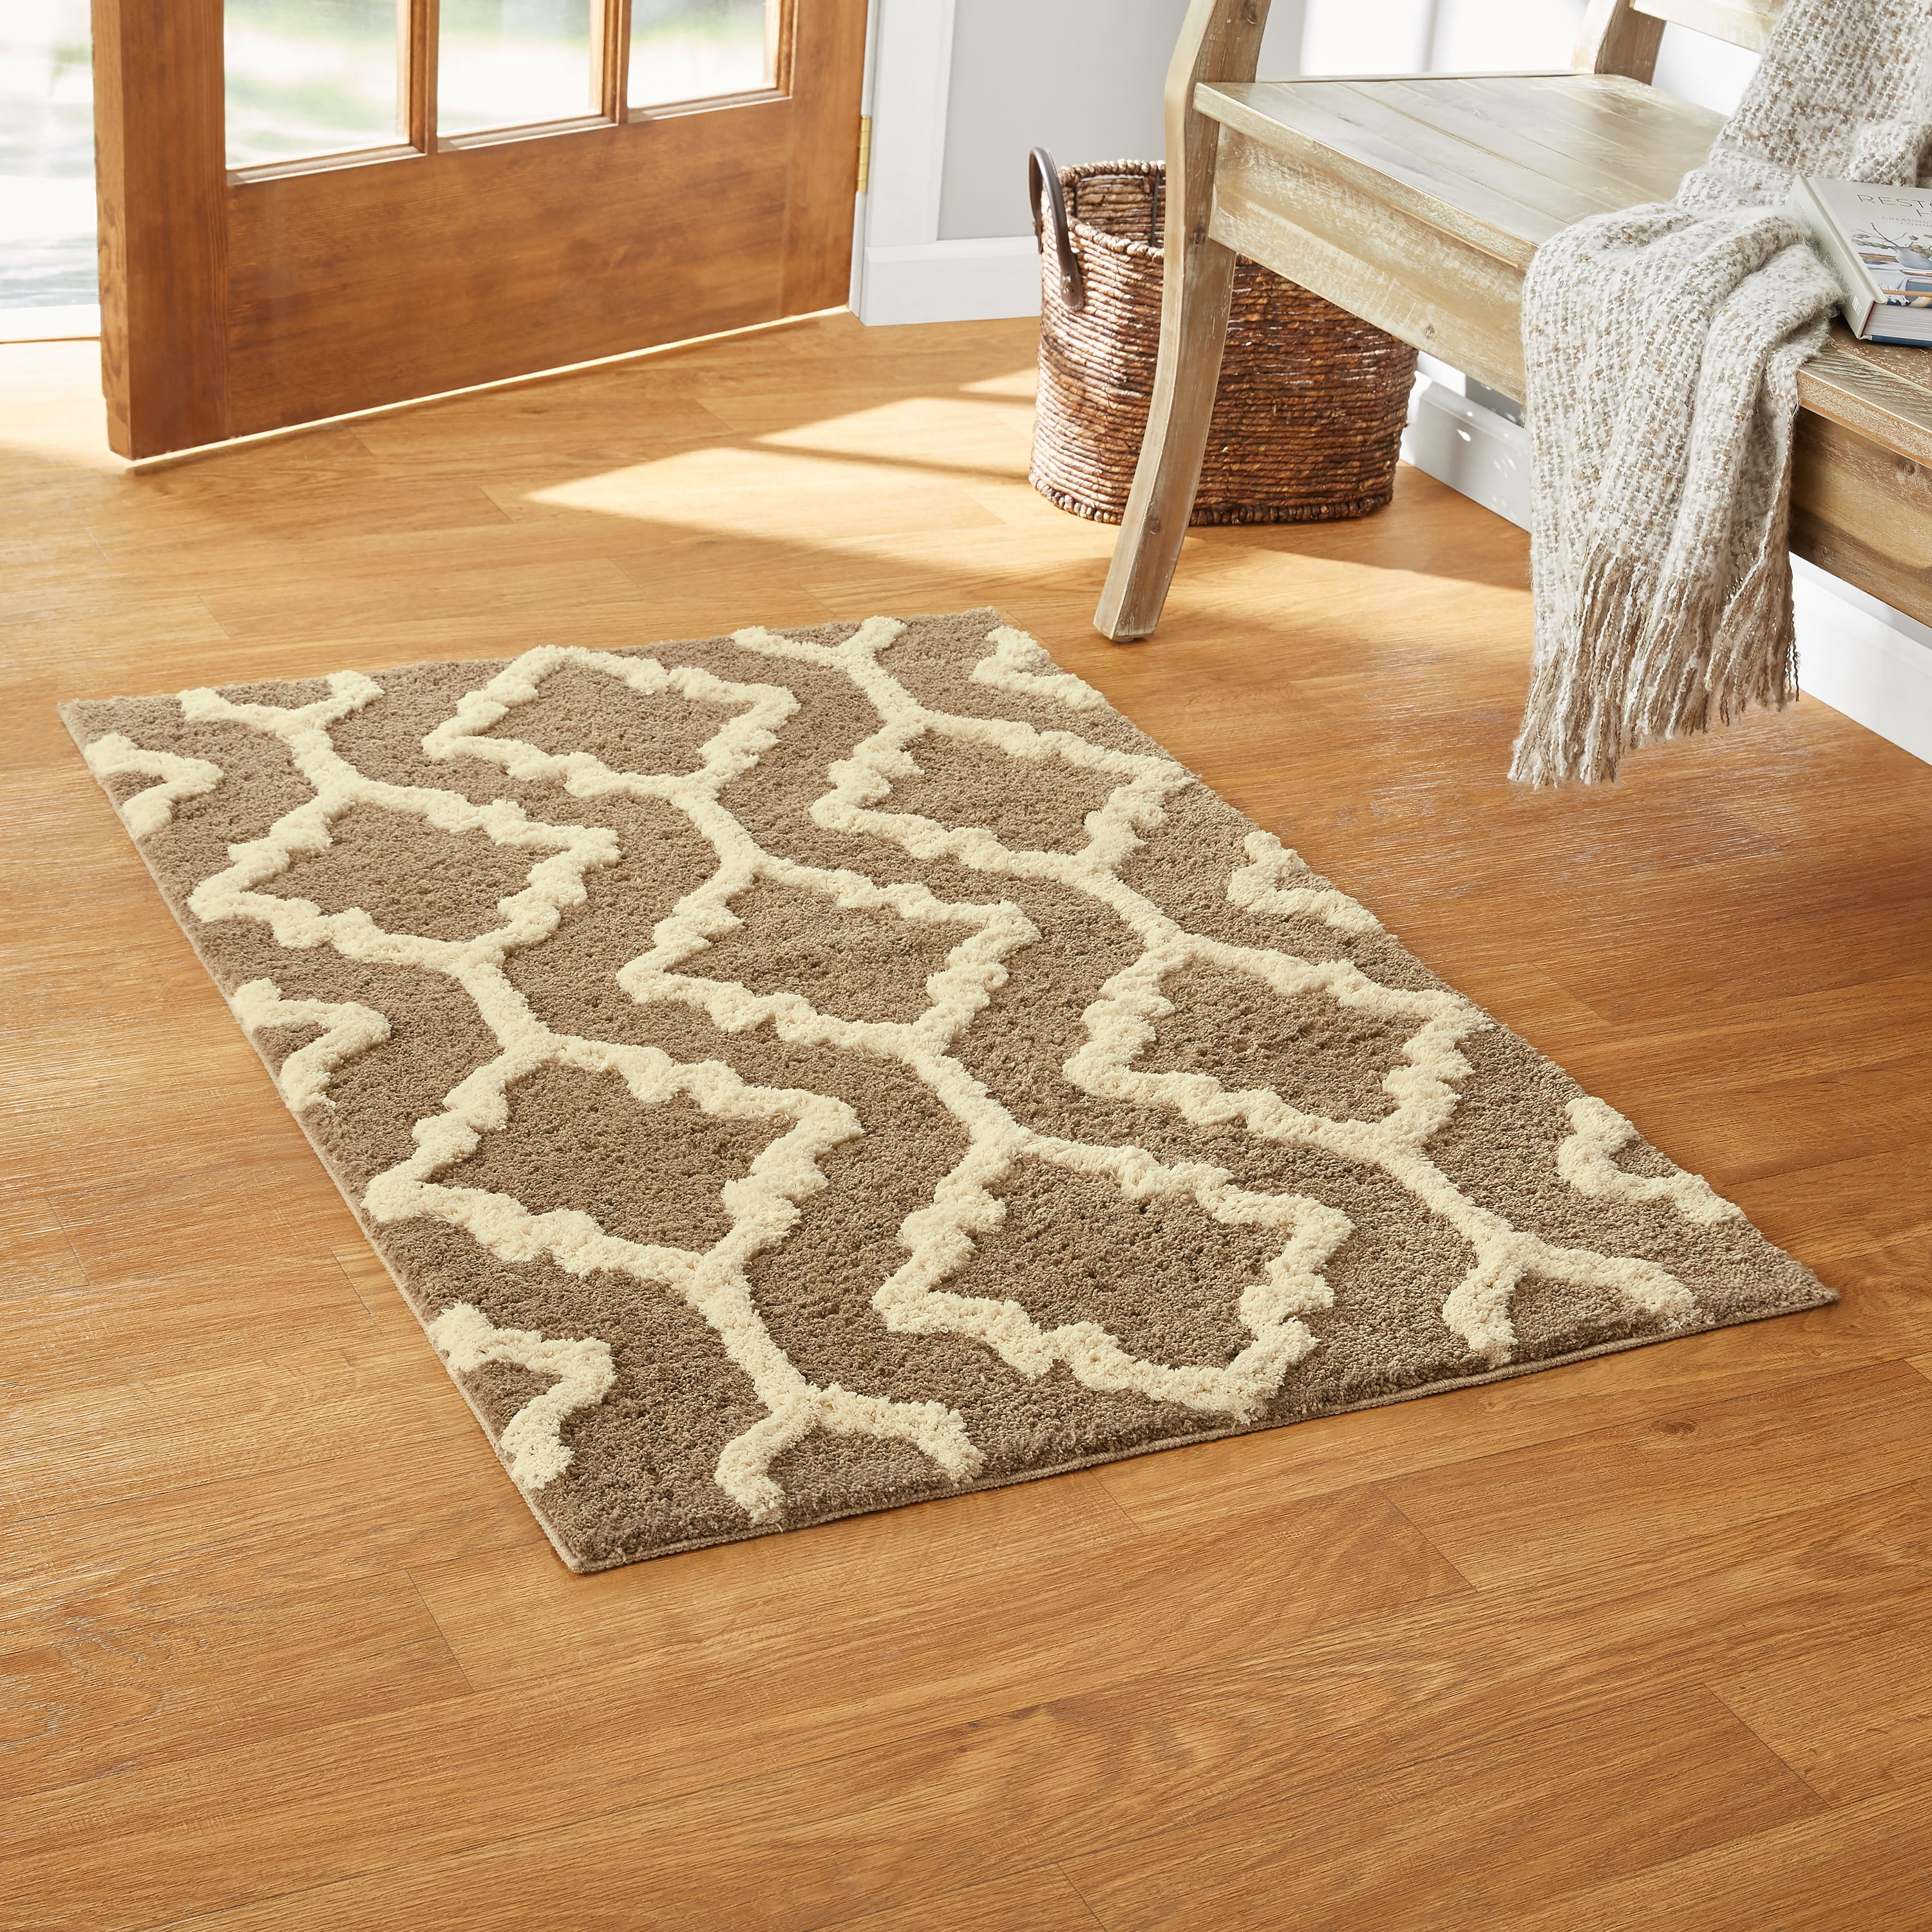 Taupe Geo Polyester Rug, Better Homes And Gardens Geo Waves Textured Print Area Rugosa